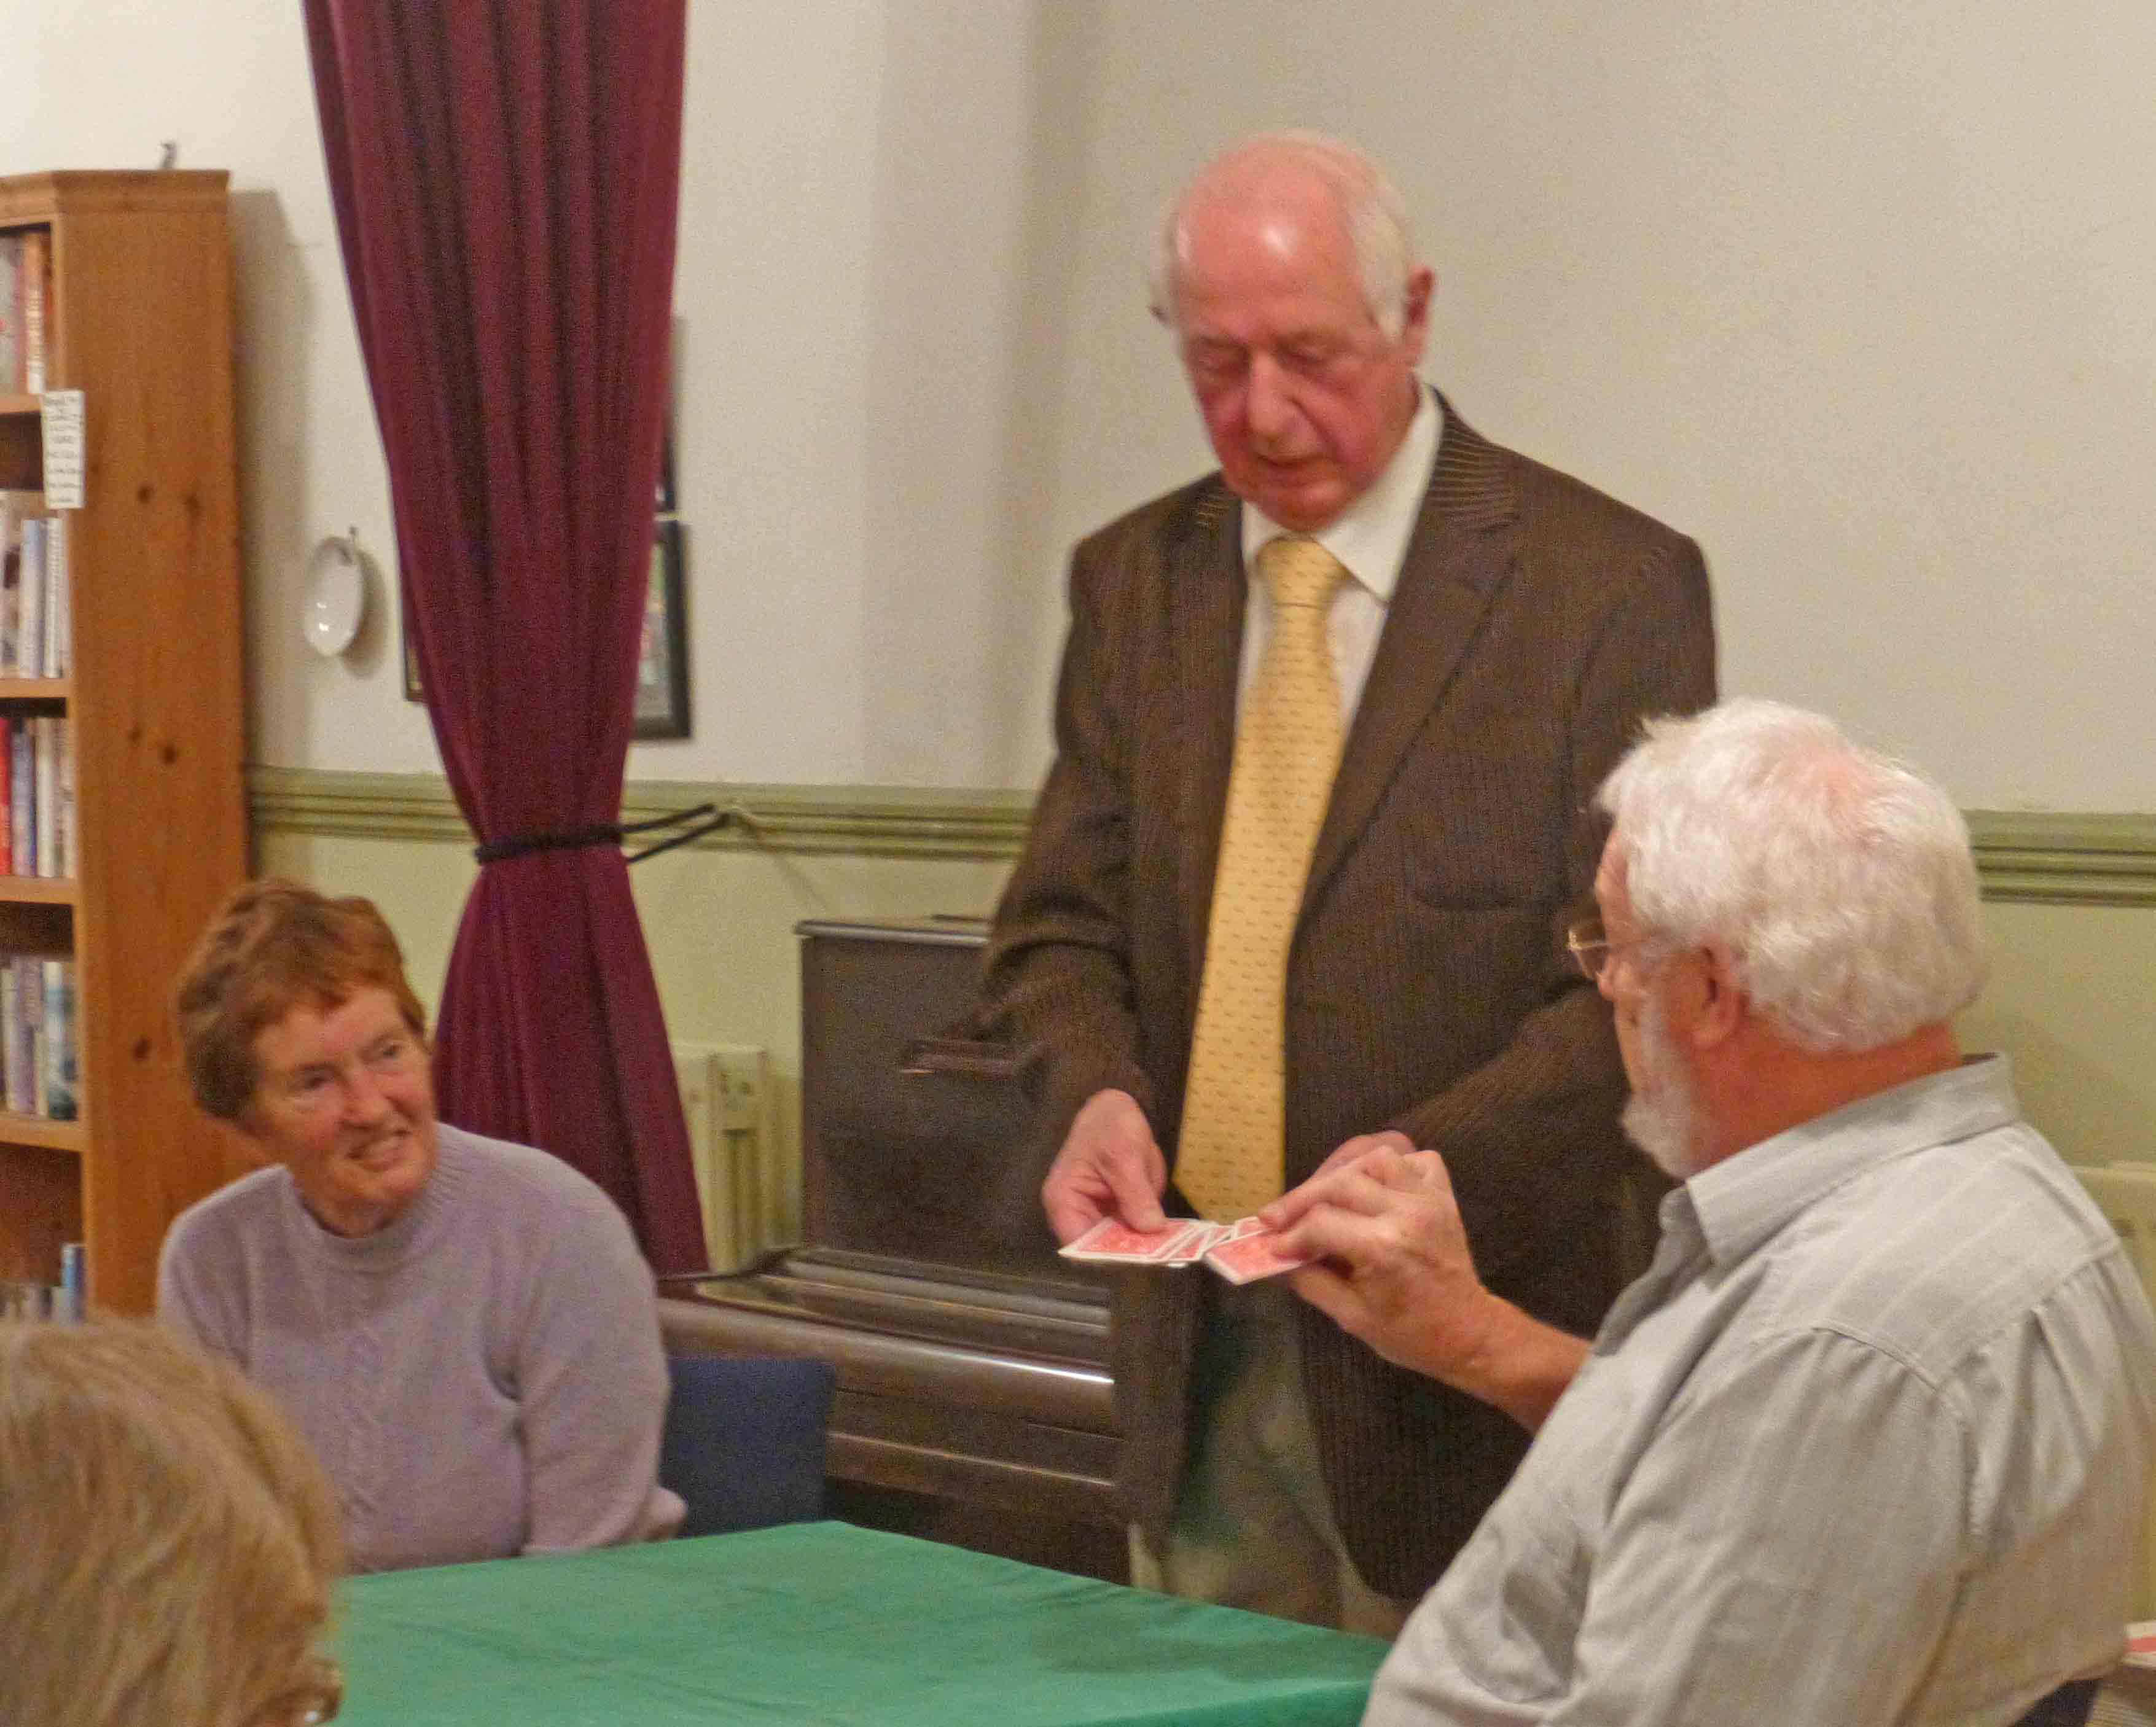 Tony Griffith - Magician - Open Meeting - April 2014